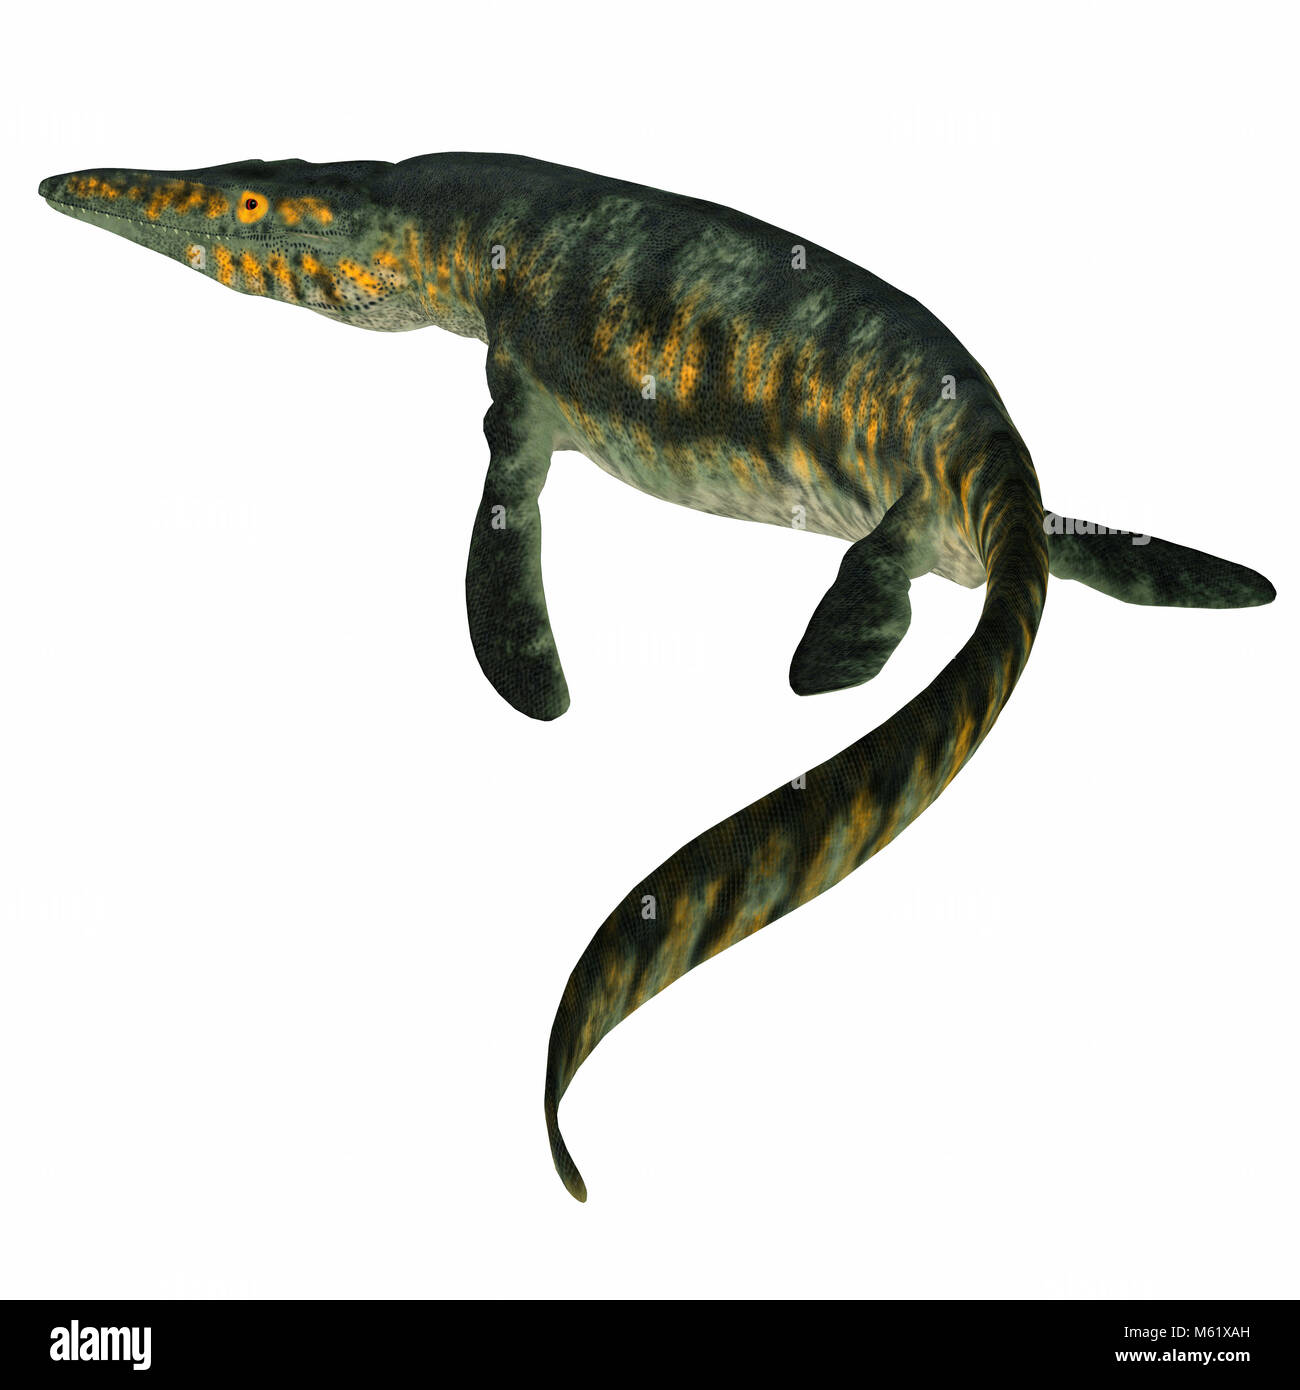 Tylosaurus Marine Reptile - Tylosaurus was a carnivorous marine reptile that lived in the North America Western Interior Seaway during the Cretaceous. Stock Photo